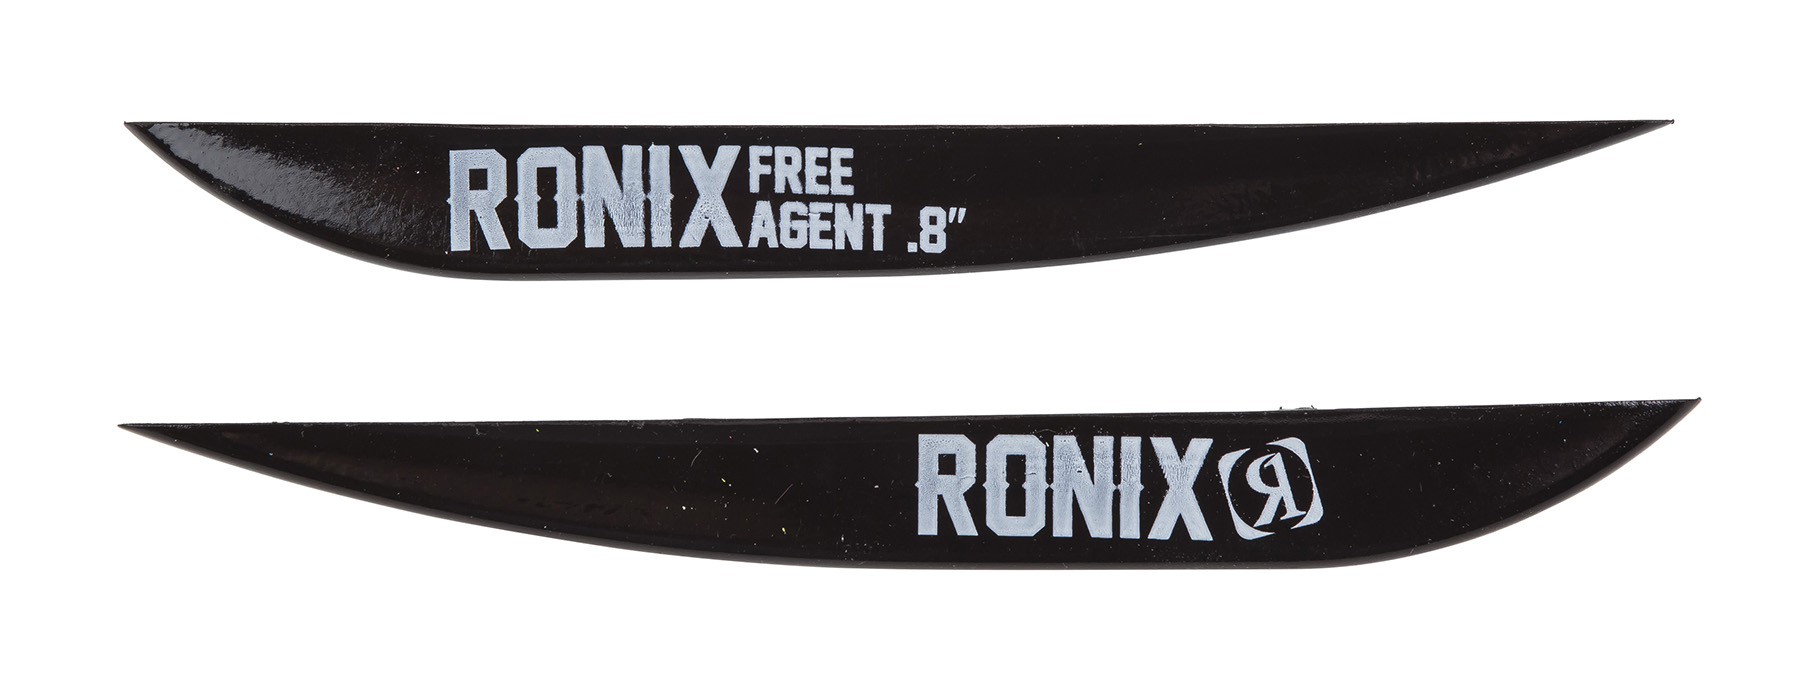   .8'' - FREE AGENT FIN - 2 PACK - BLACK RONIX 2019